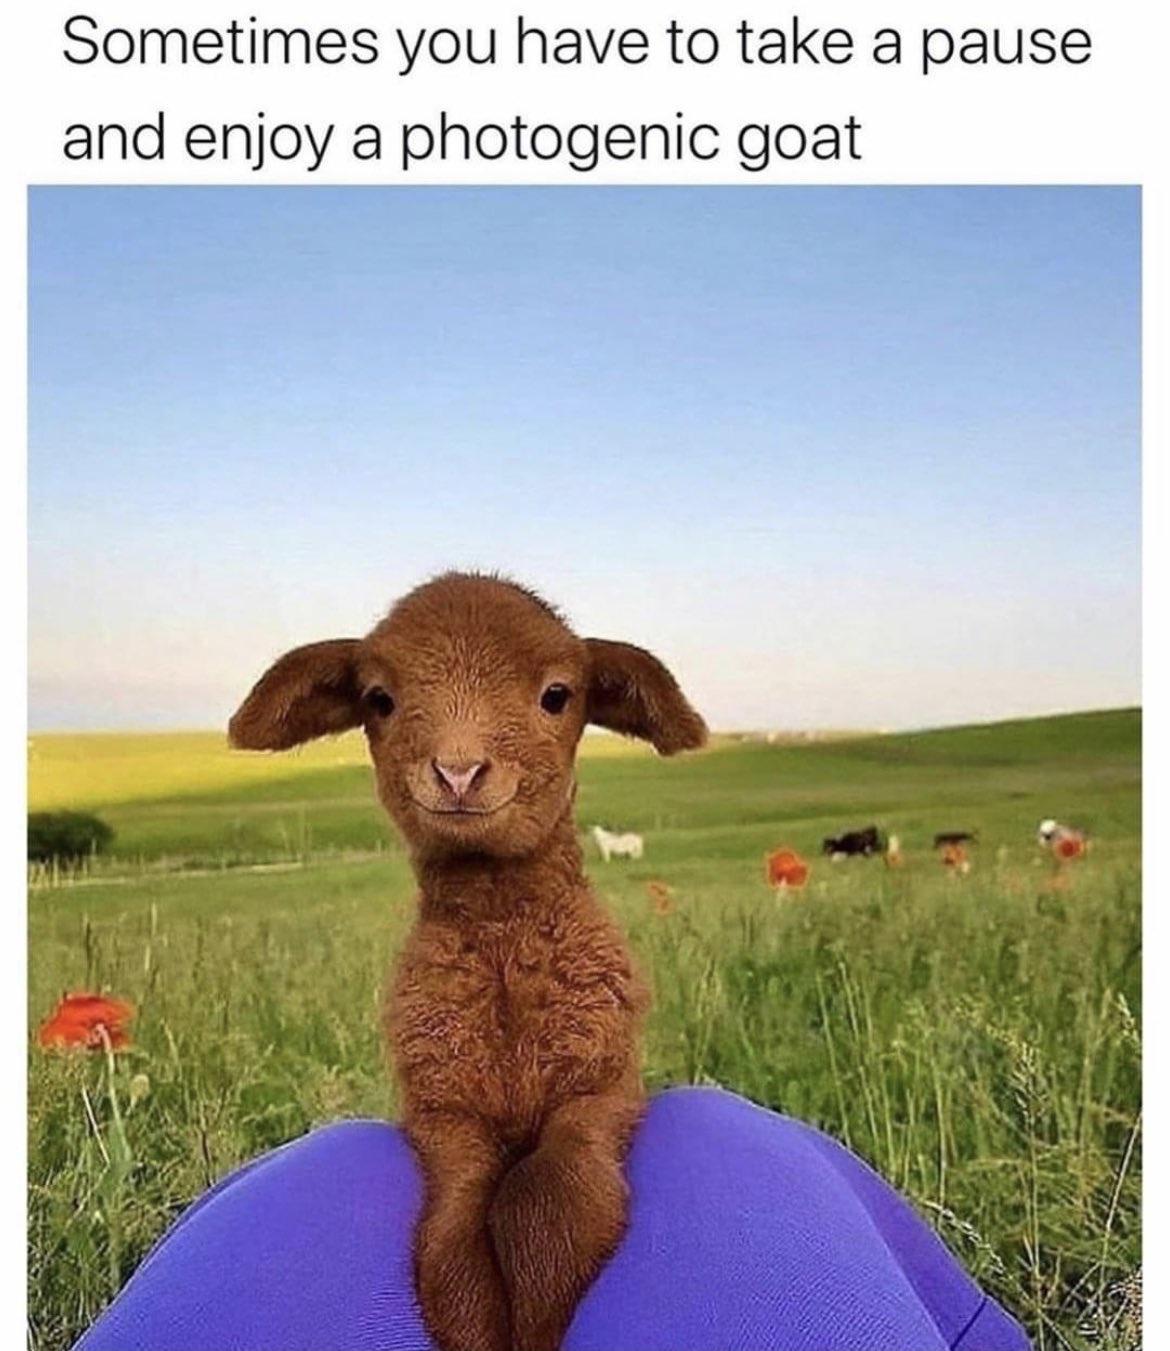 sometimes you have to pause and enjoy - Sometimes you have to take a pause and enjoy a photogenic goat